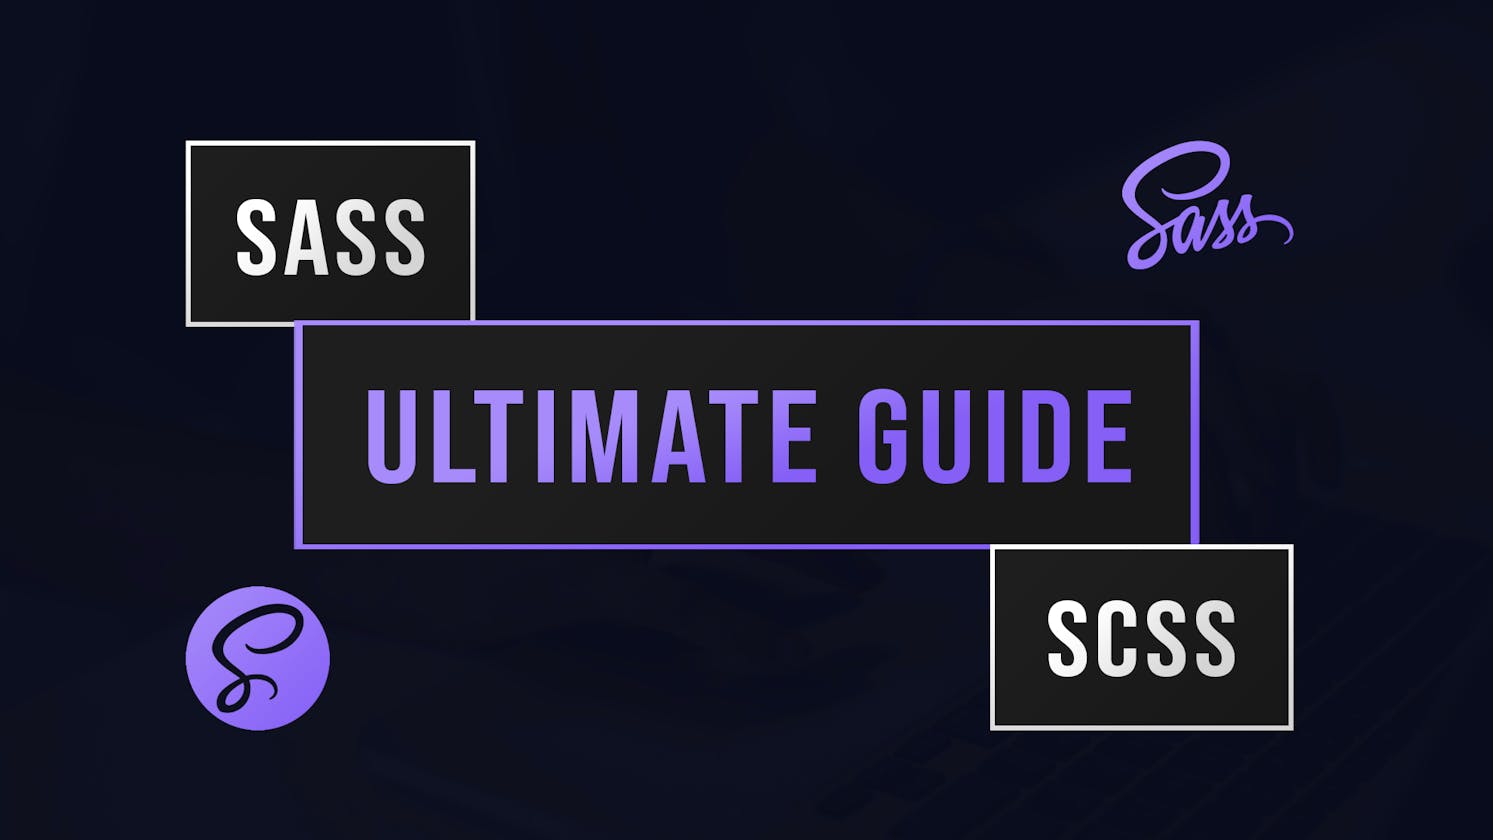 Ultimate Guide To Sass (Syntactically Awesome Stylesheets)